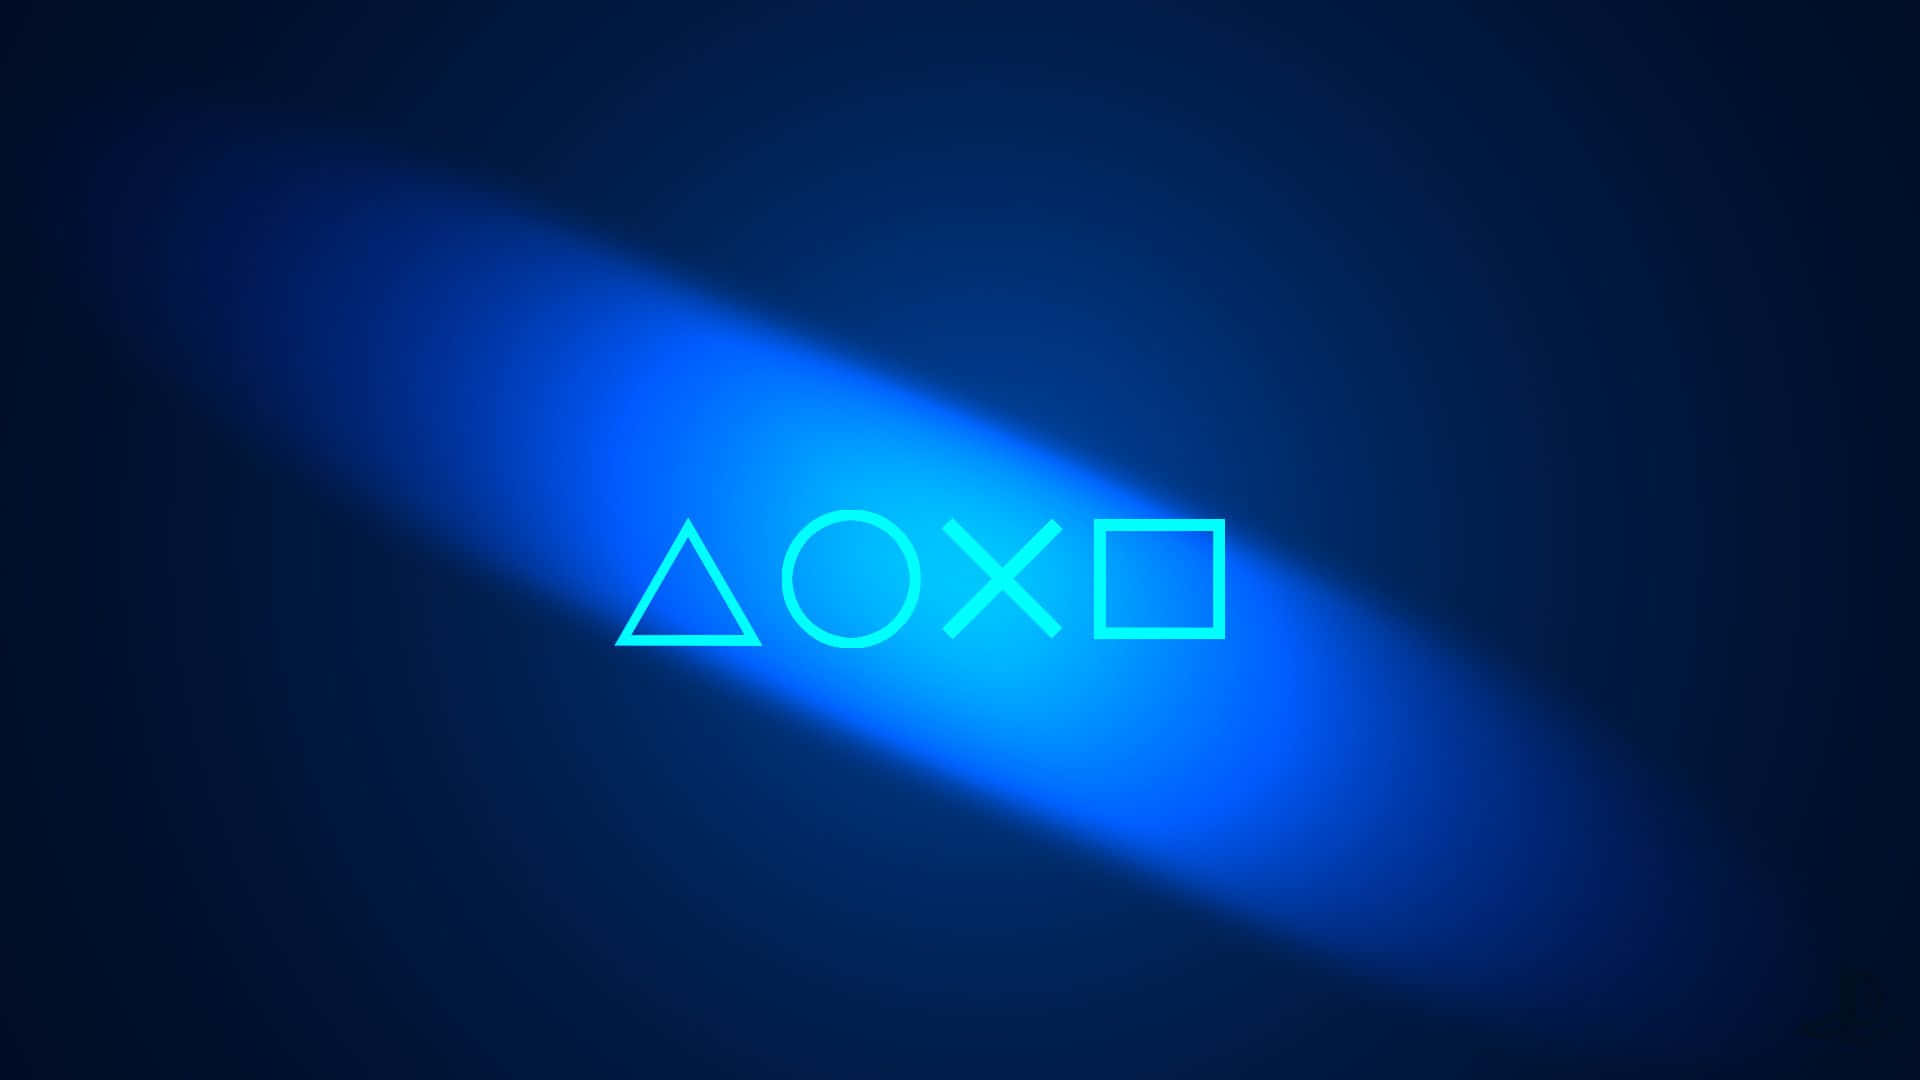 Ps5 Background